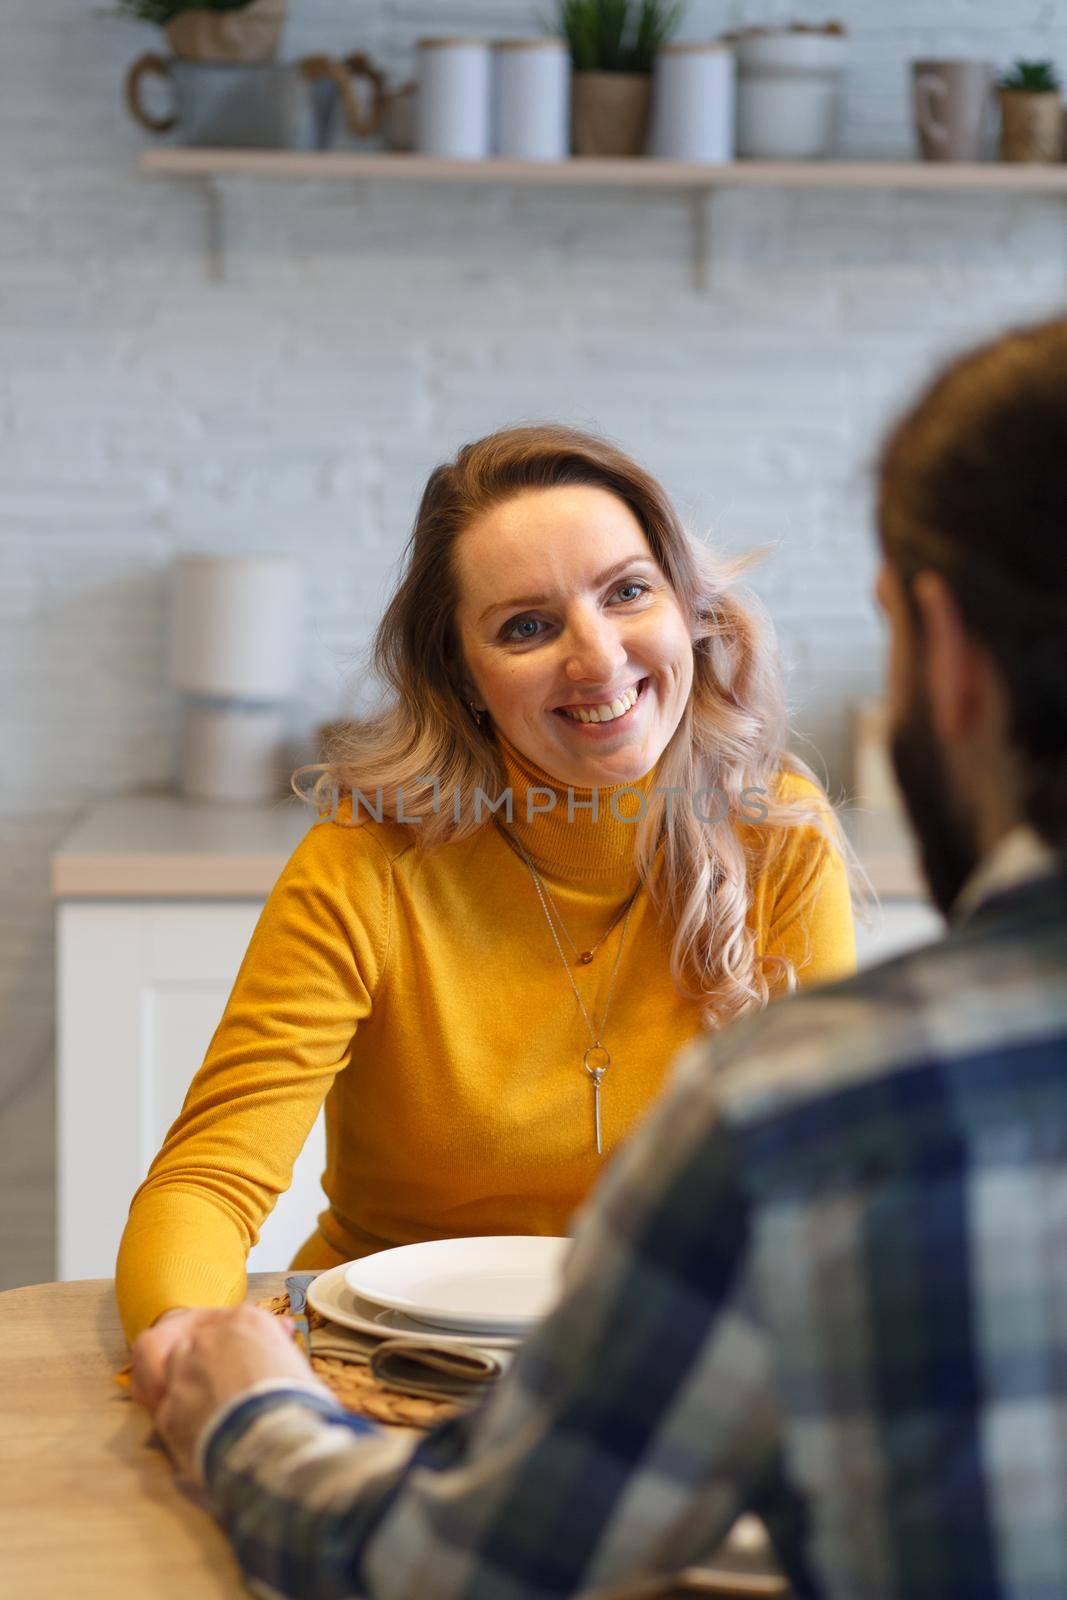 Beautiful couple having a conversation while looking at each other sitting at the table in a kitchen